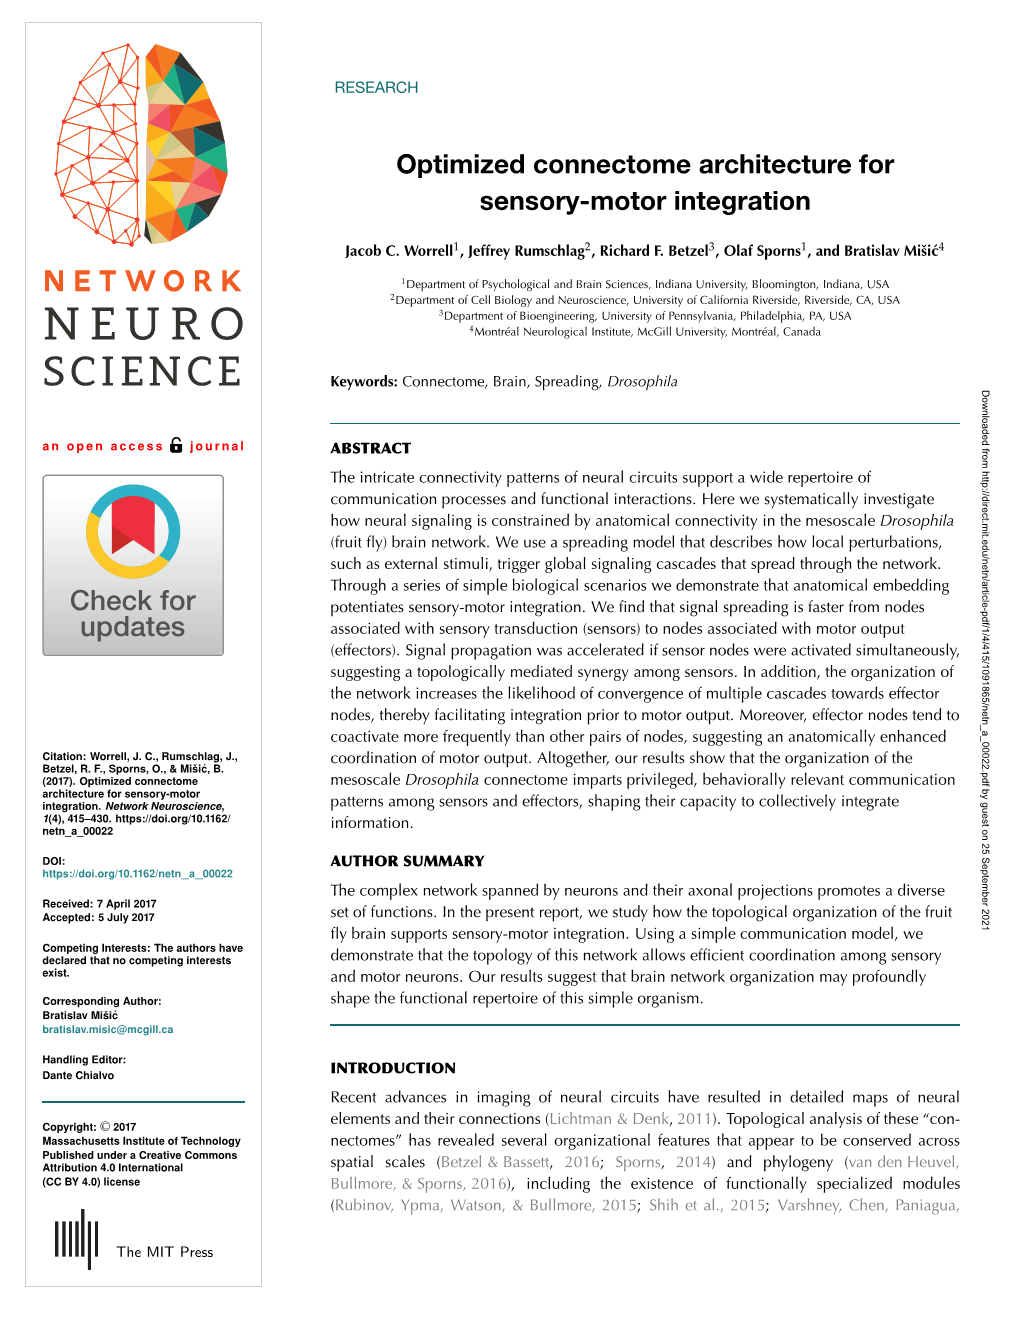 Optimized Connectome Architecture for Sensory-Motor Integration